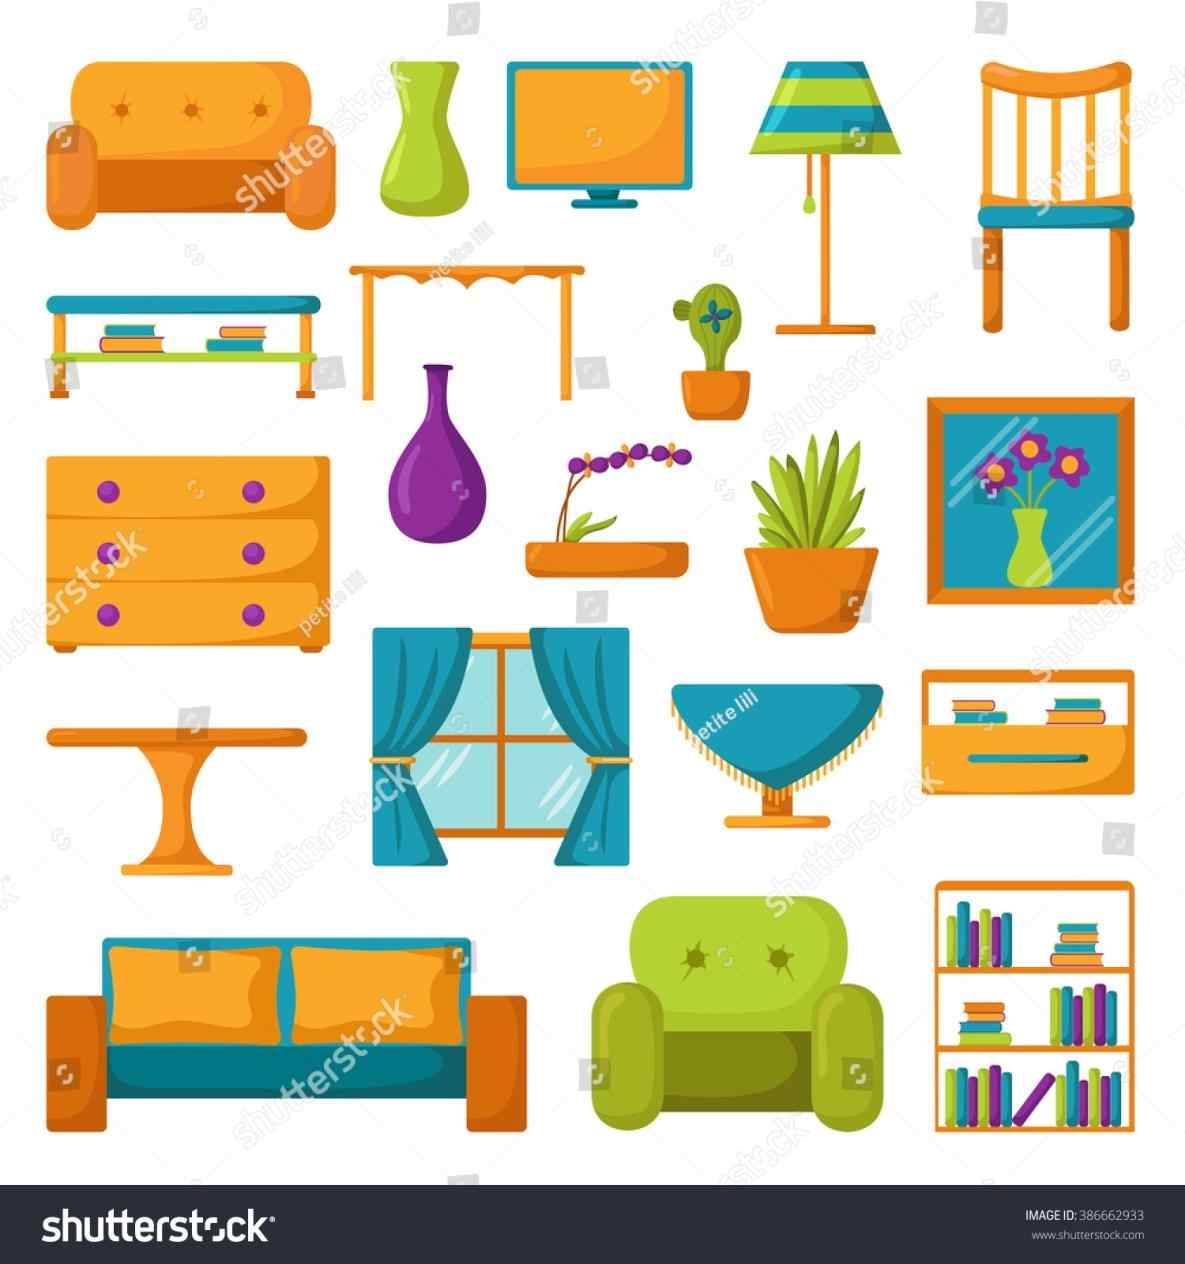 Furniture clipart household.